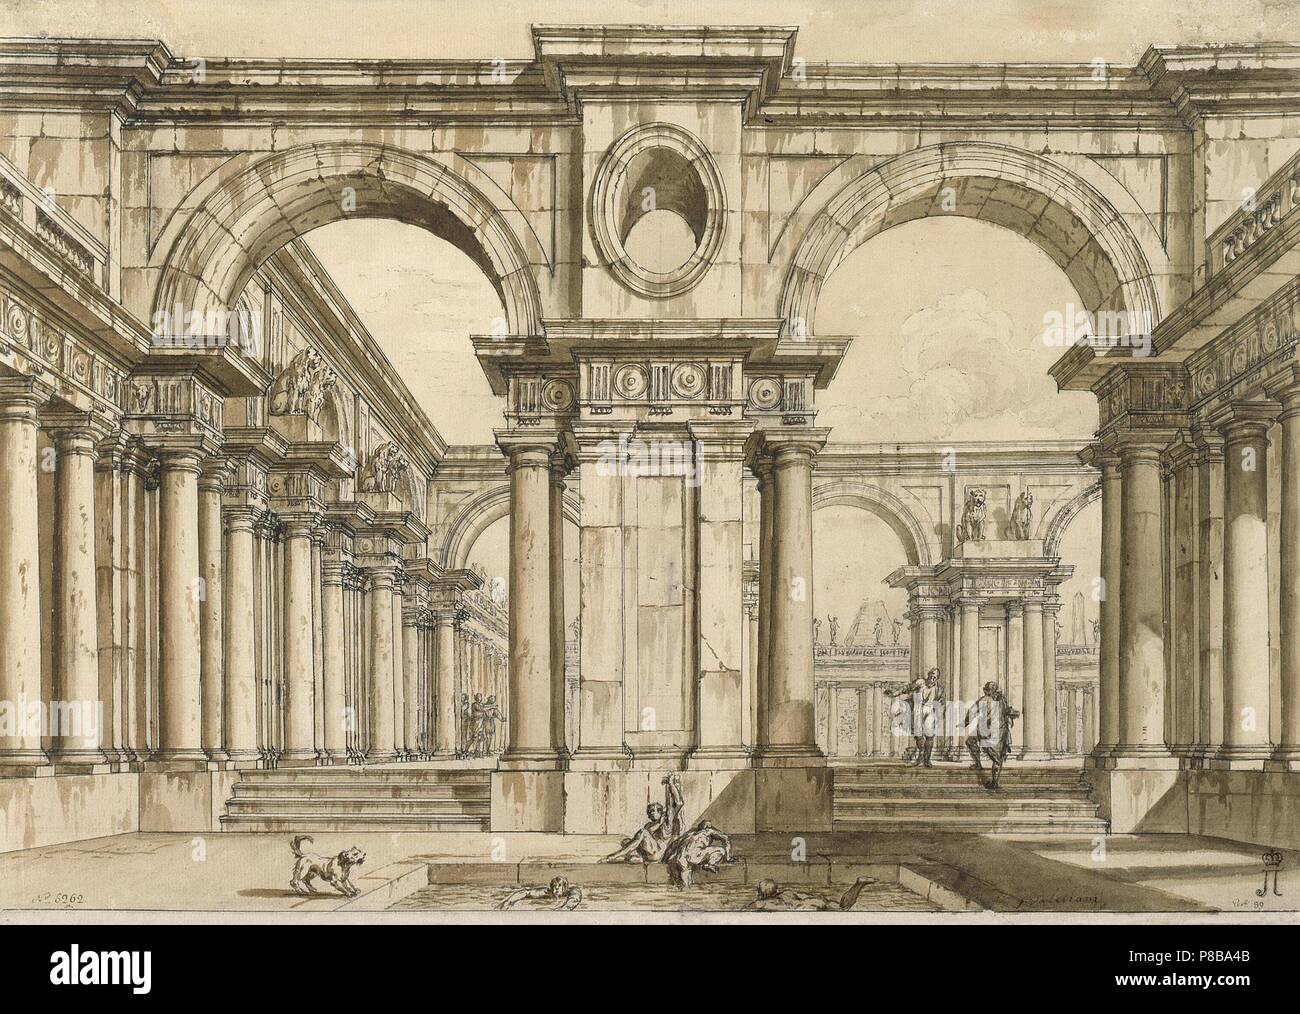 Set design for the Opera La clemenza di Tito (The Clemency of Titus) by Wolfgang Amadeus Mozart. Museum: State Hermitage, St. Petersburg. Stock Photo